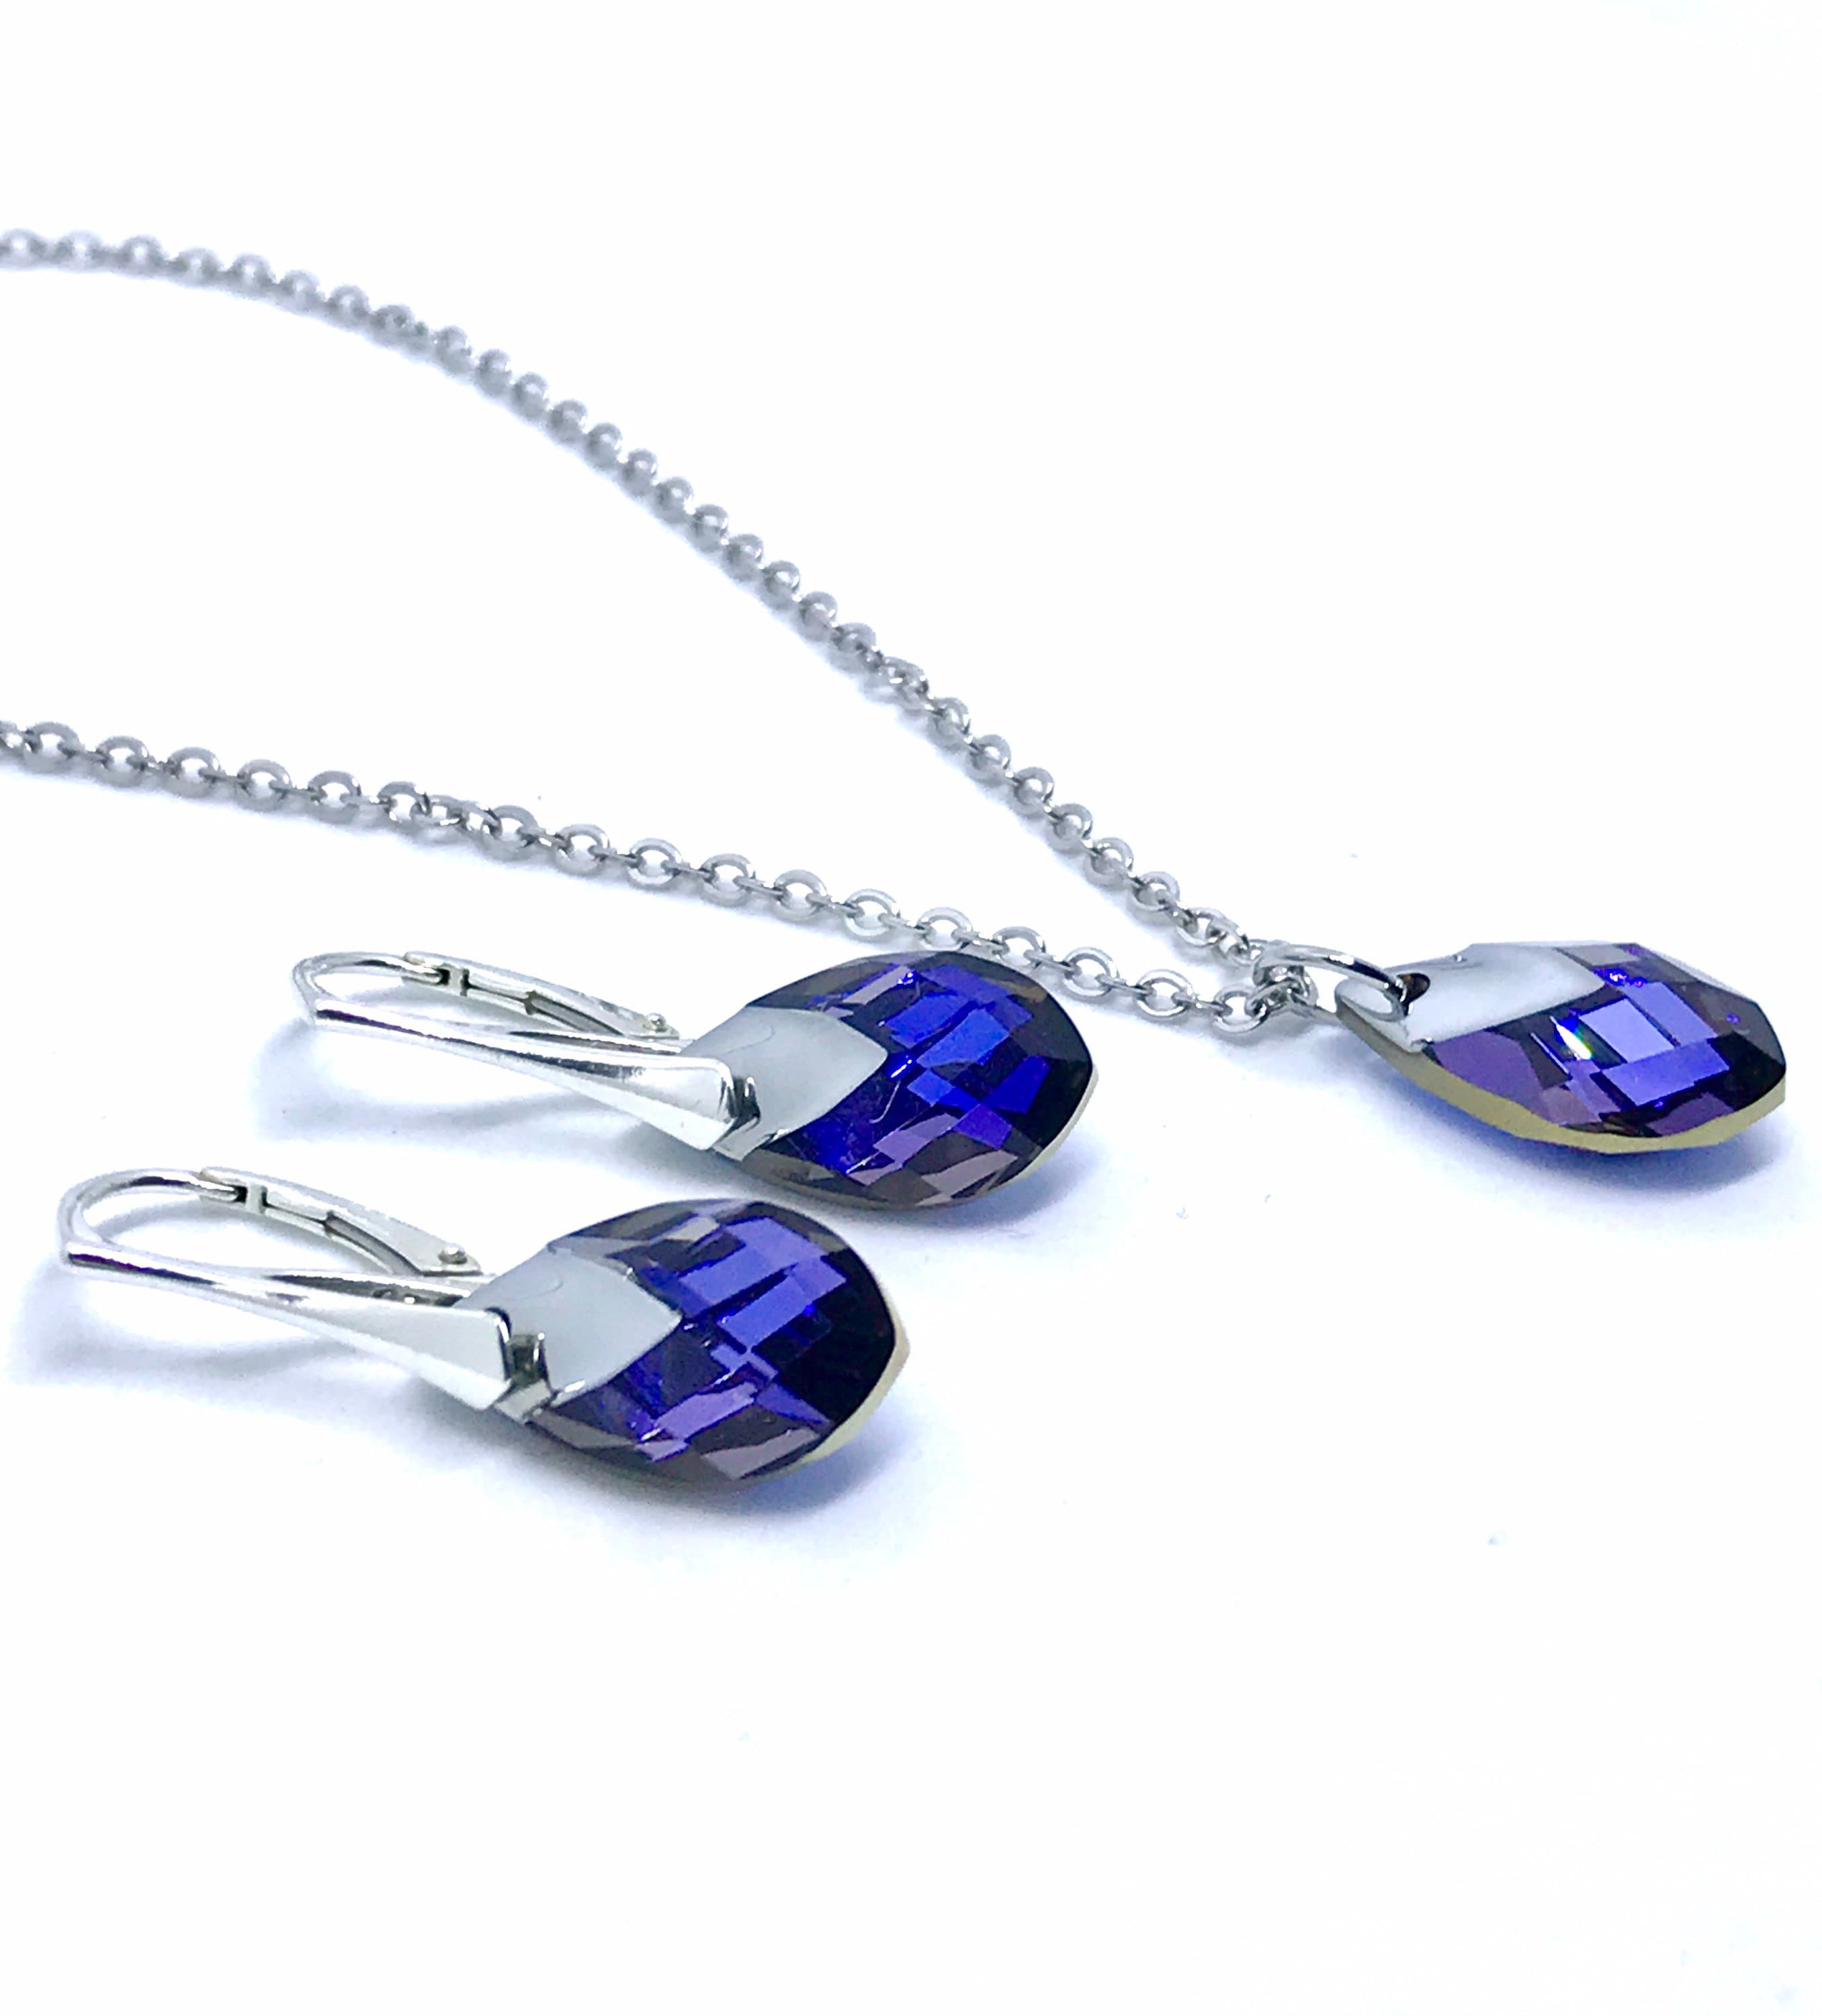 For Women Girls NA BEAUTY Love Drop Necklace Pendant with Natural Sapphire Blue Swaroski Zirconia